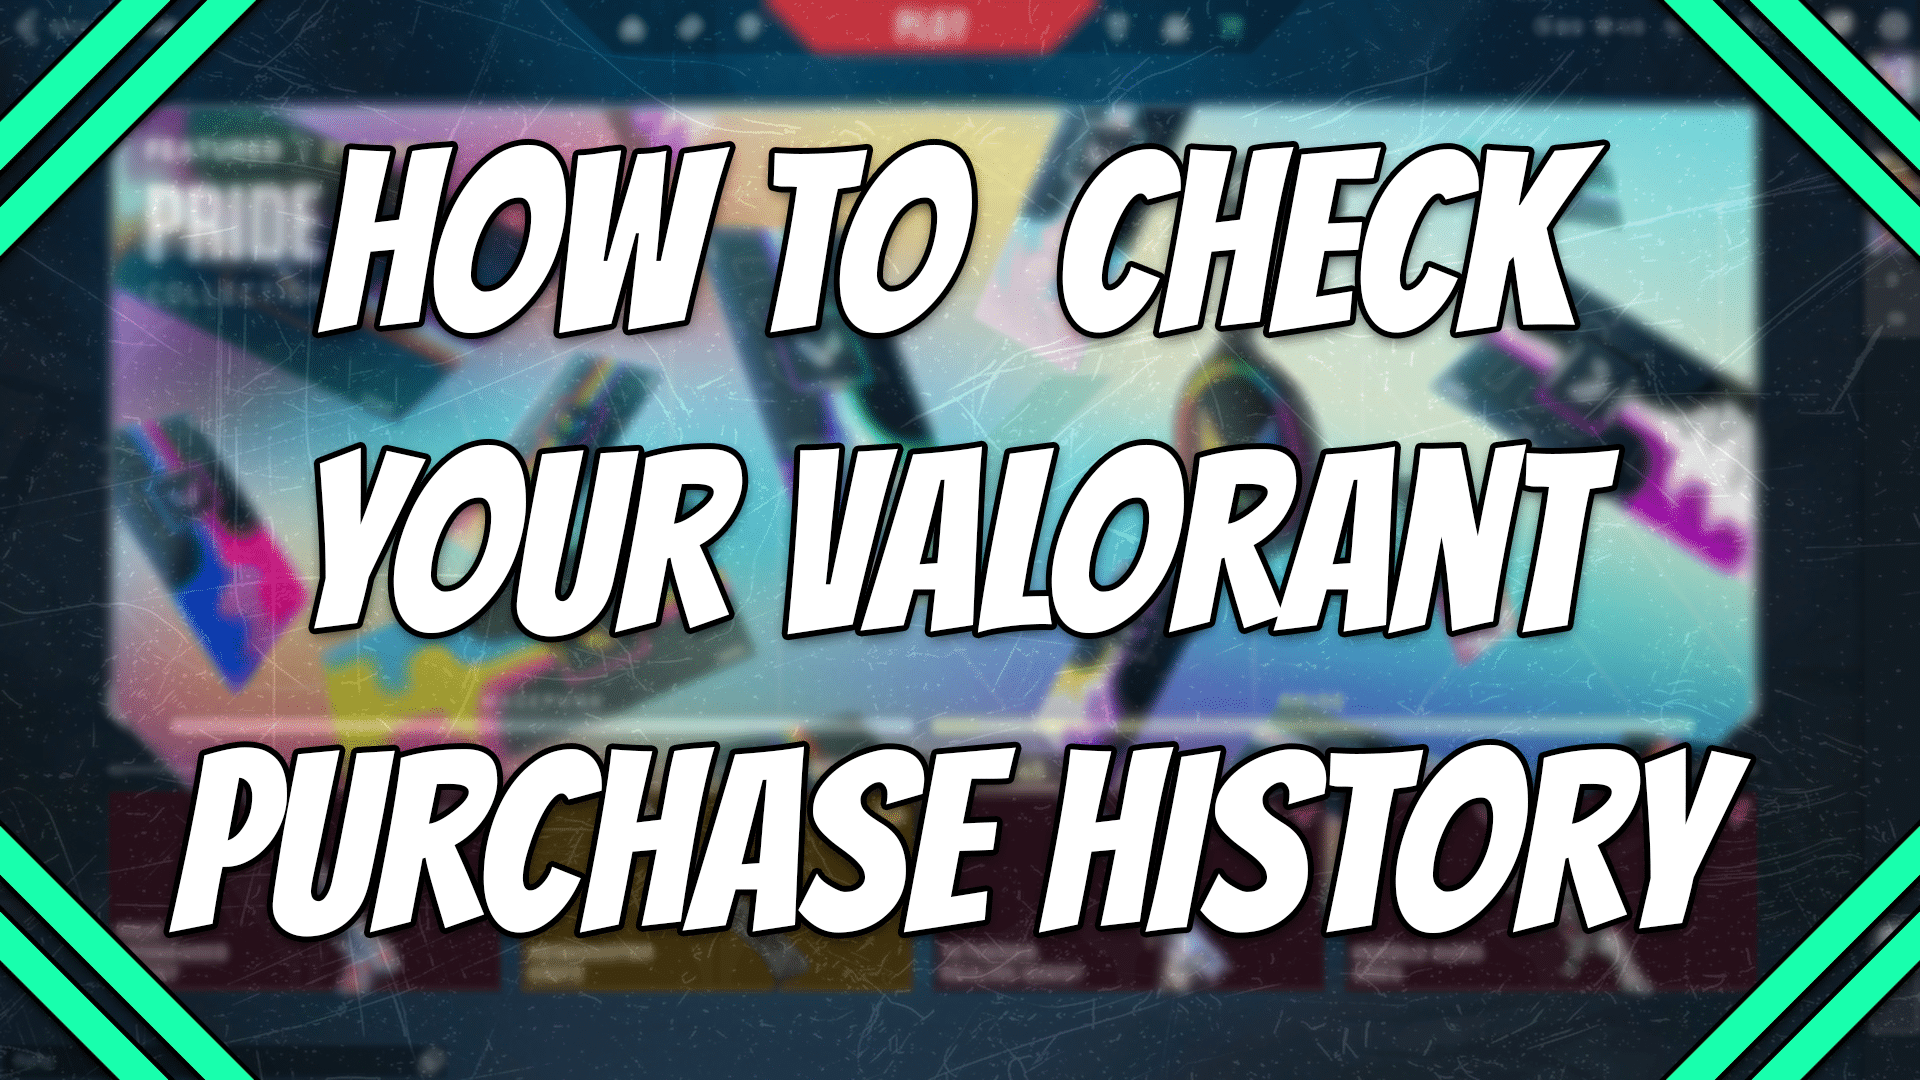 How to check your valorant purchase history title card